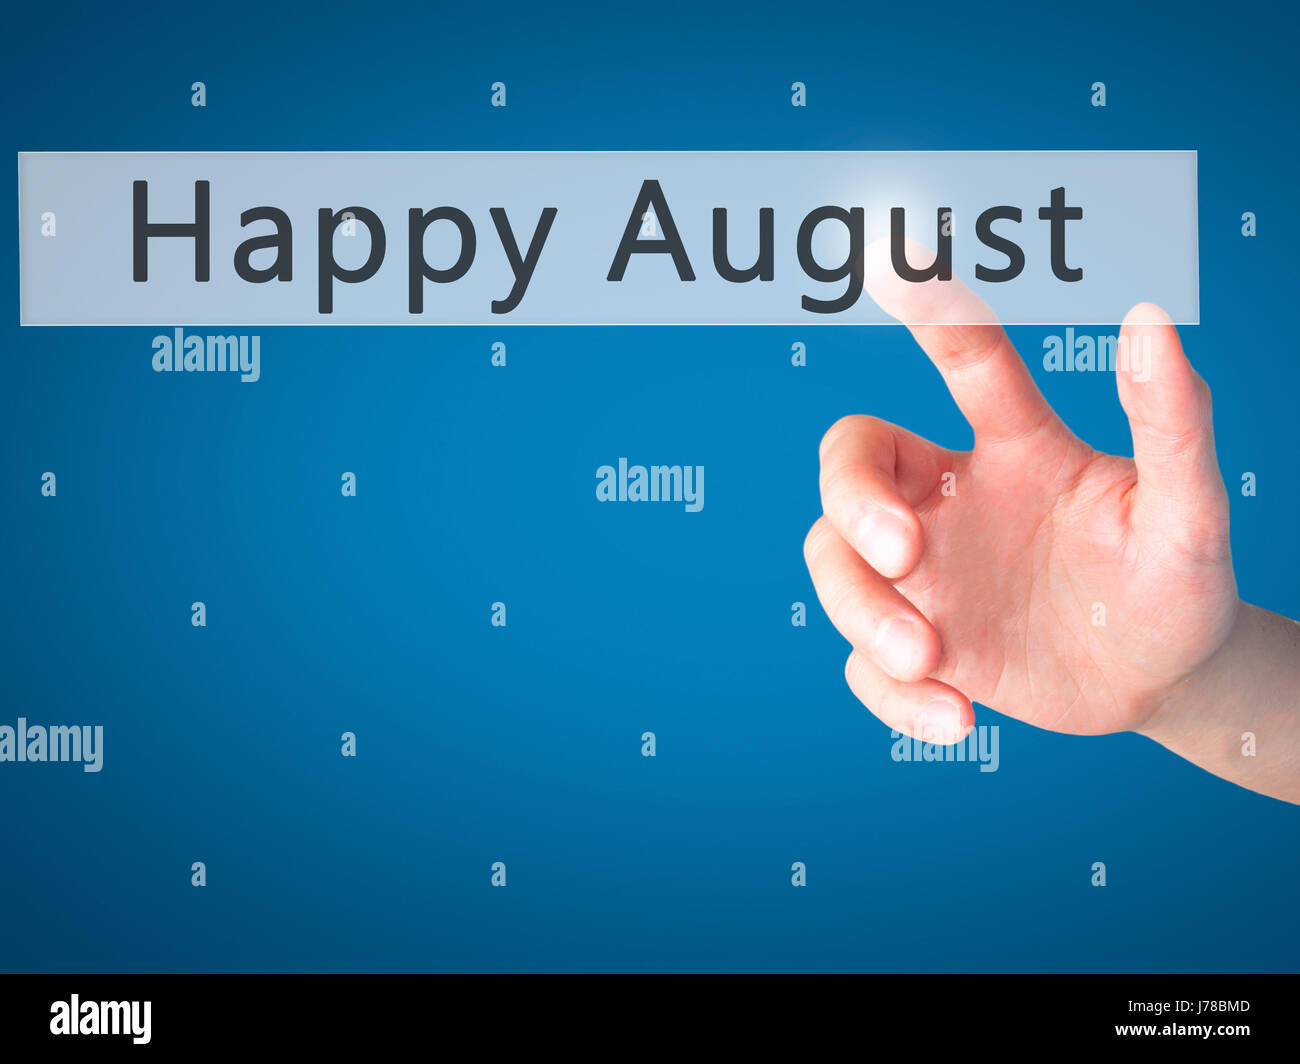 Happy August - Hand pressing a button on blurred background concept . Business, technology, internet concept. Stock Photo Stock Photo